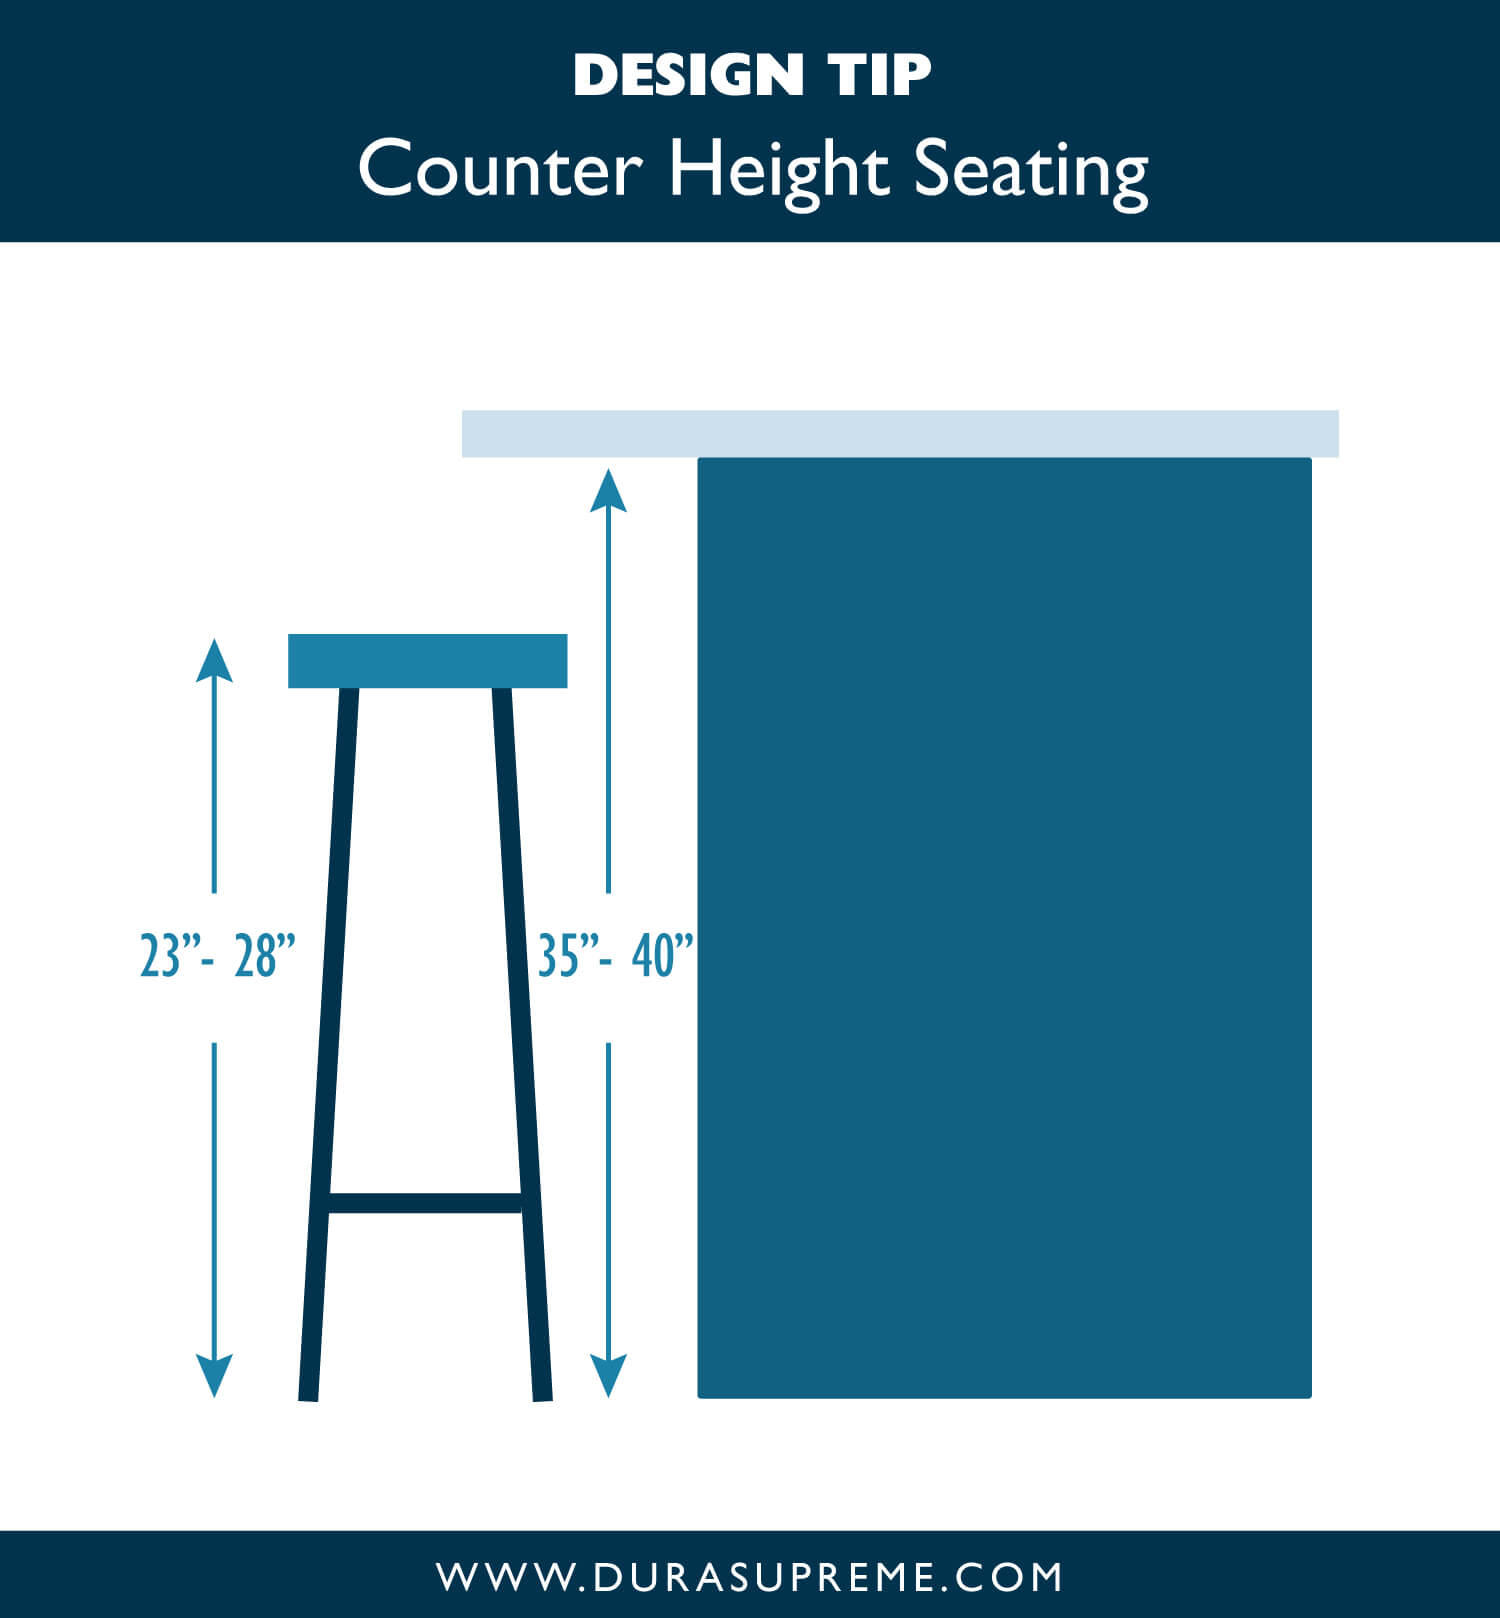 Kitchen Design Tip: Counter Height Seating for the Kitchen Island or Peninsula